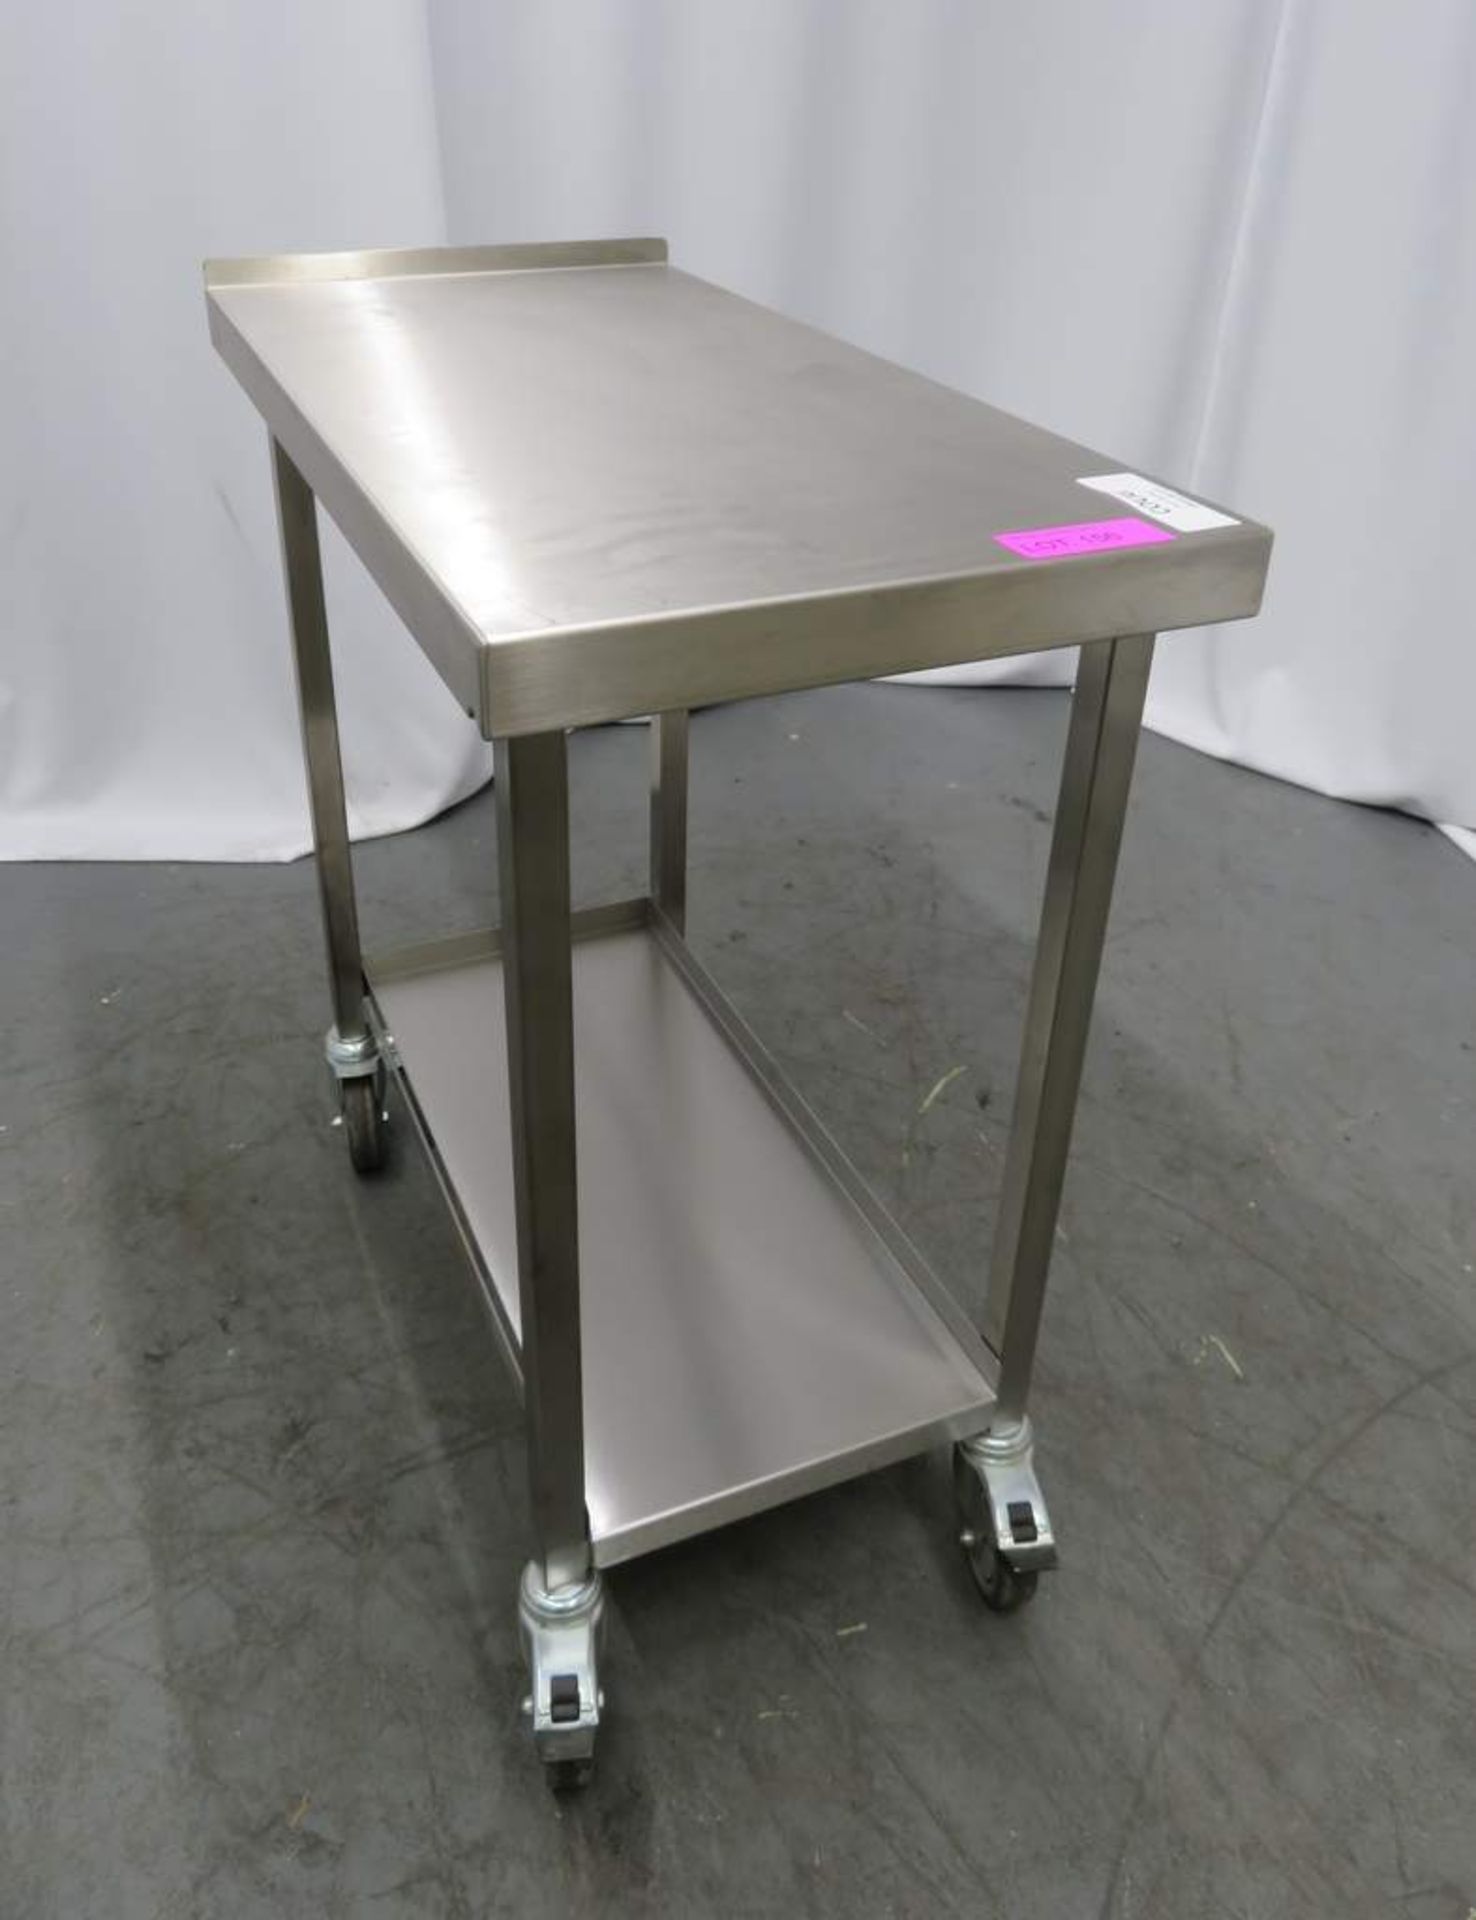 PORTABLE STAINLESS STEEL END KITCHEN PREPERATION TABLE WITH UNDER SHELF